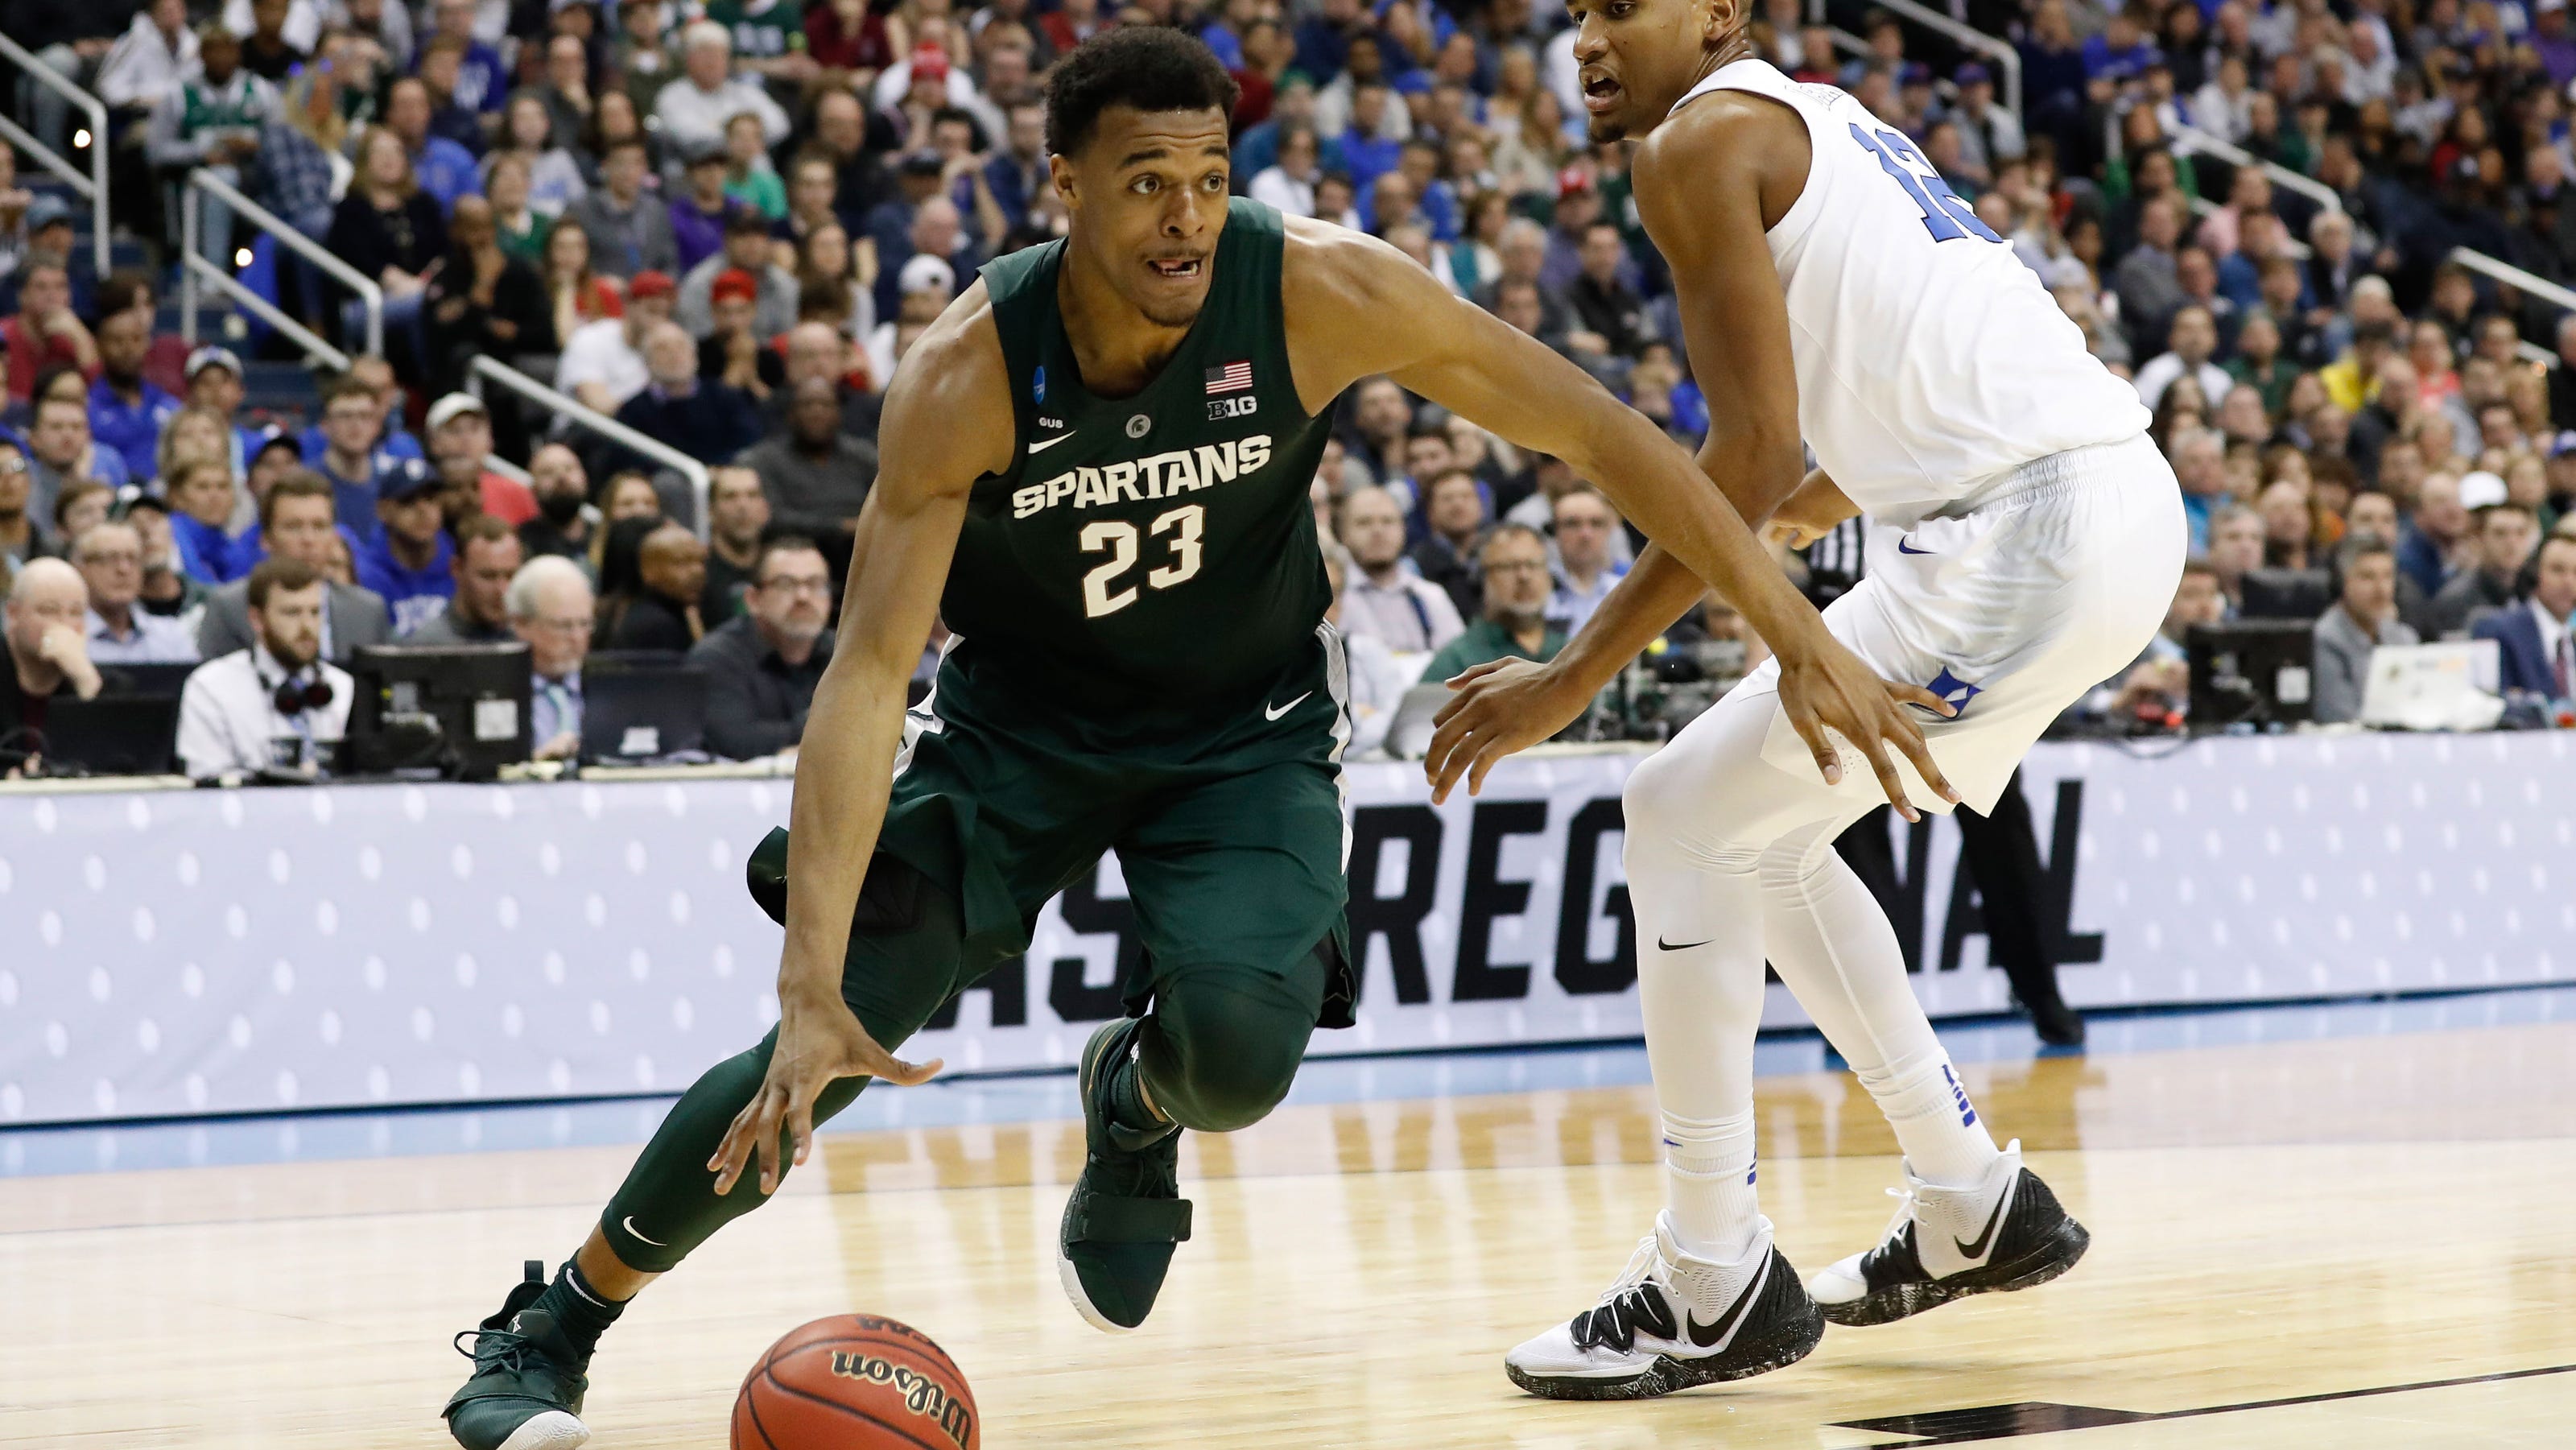 College basketball Michigan State is preseason No. 1 for first time